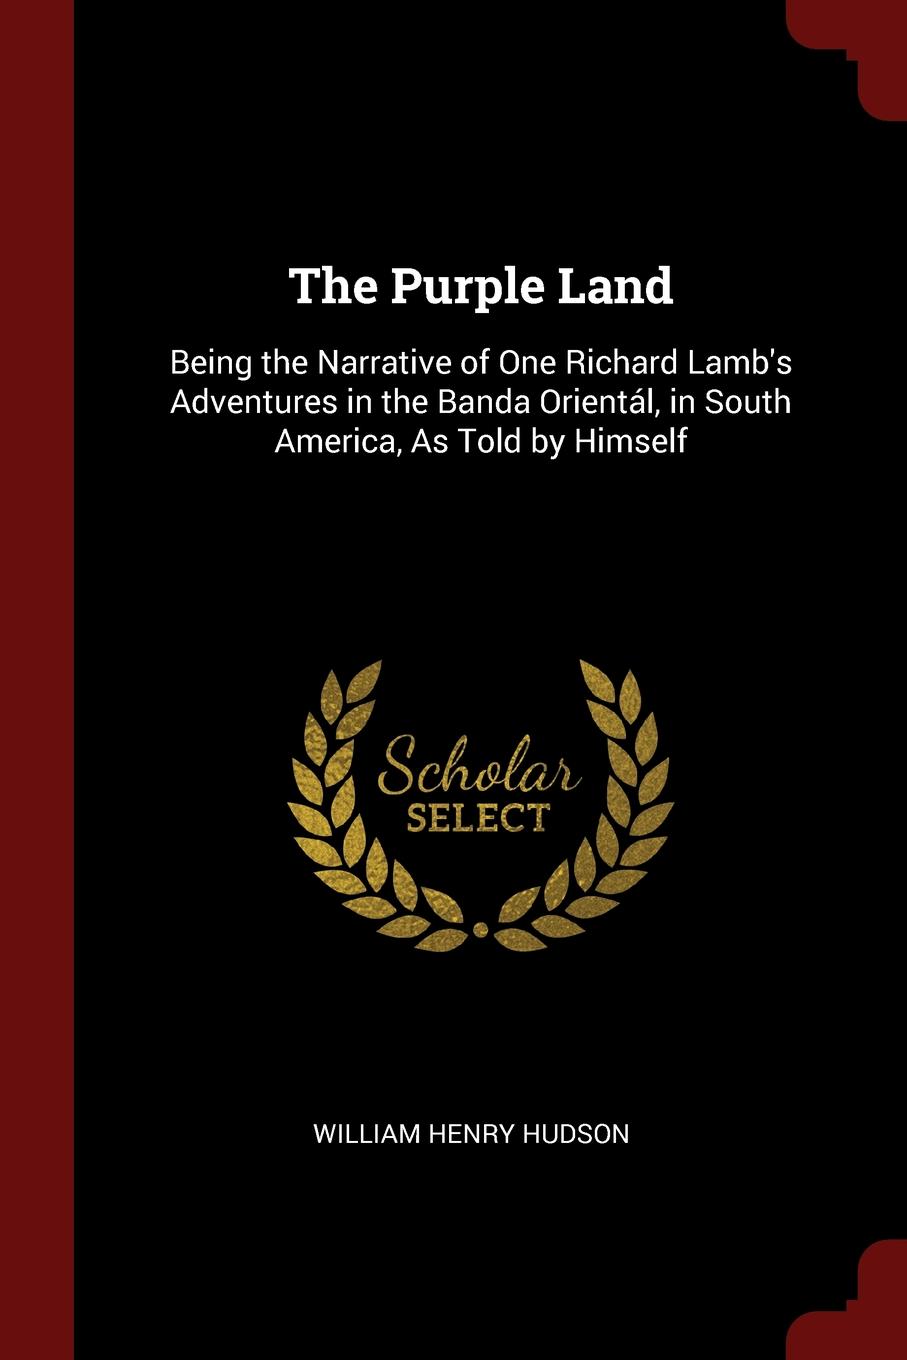 The Purple Land. Being the Narrative of One Richard Lamb.s Adventures in the Banda Oriental, in South America, As Told by Himself